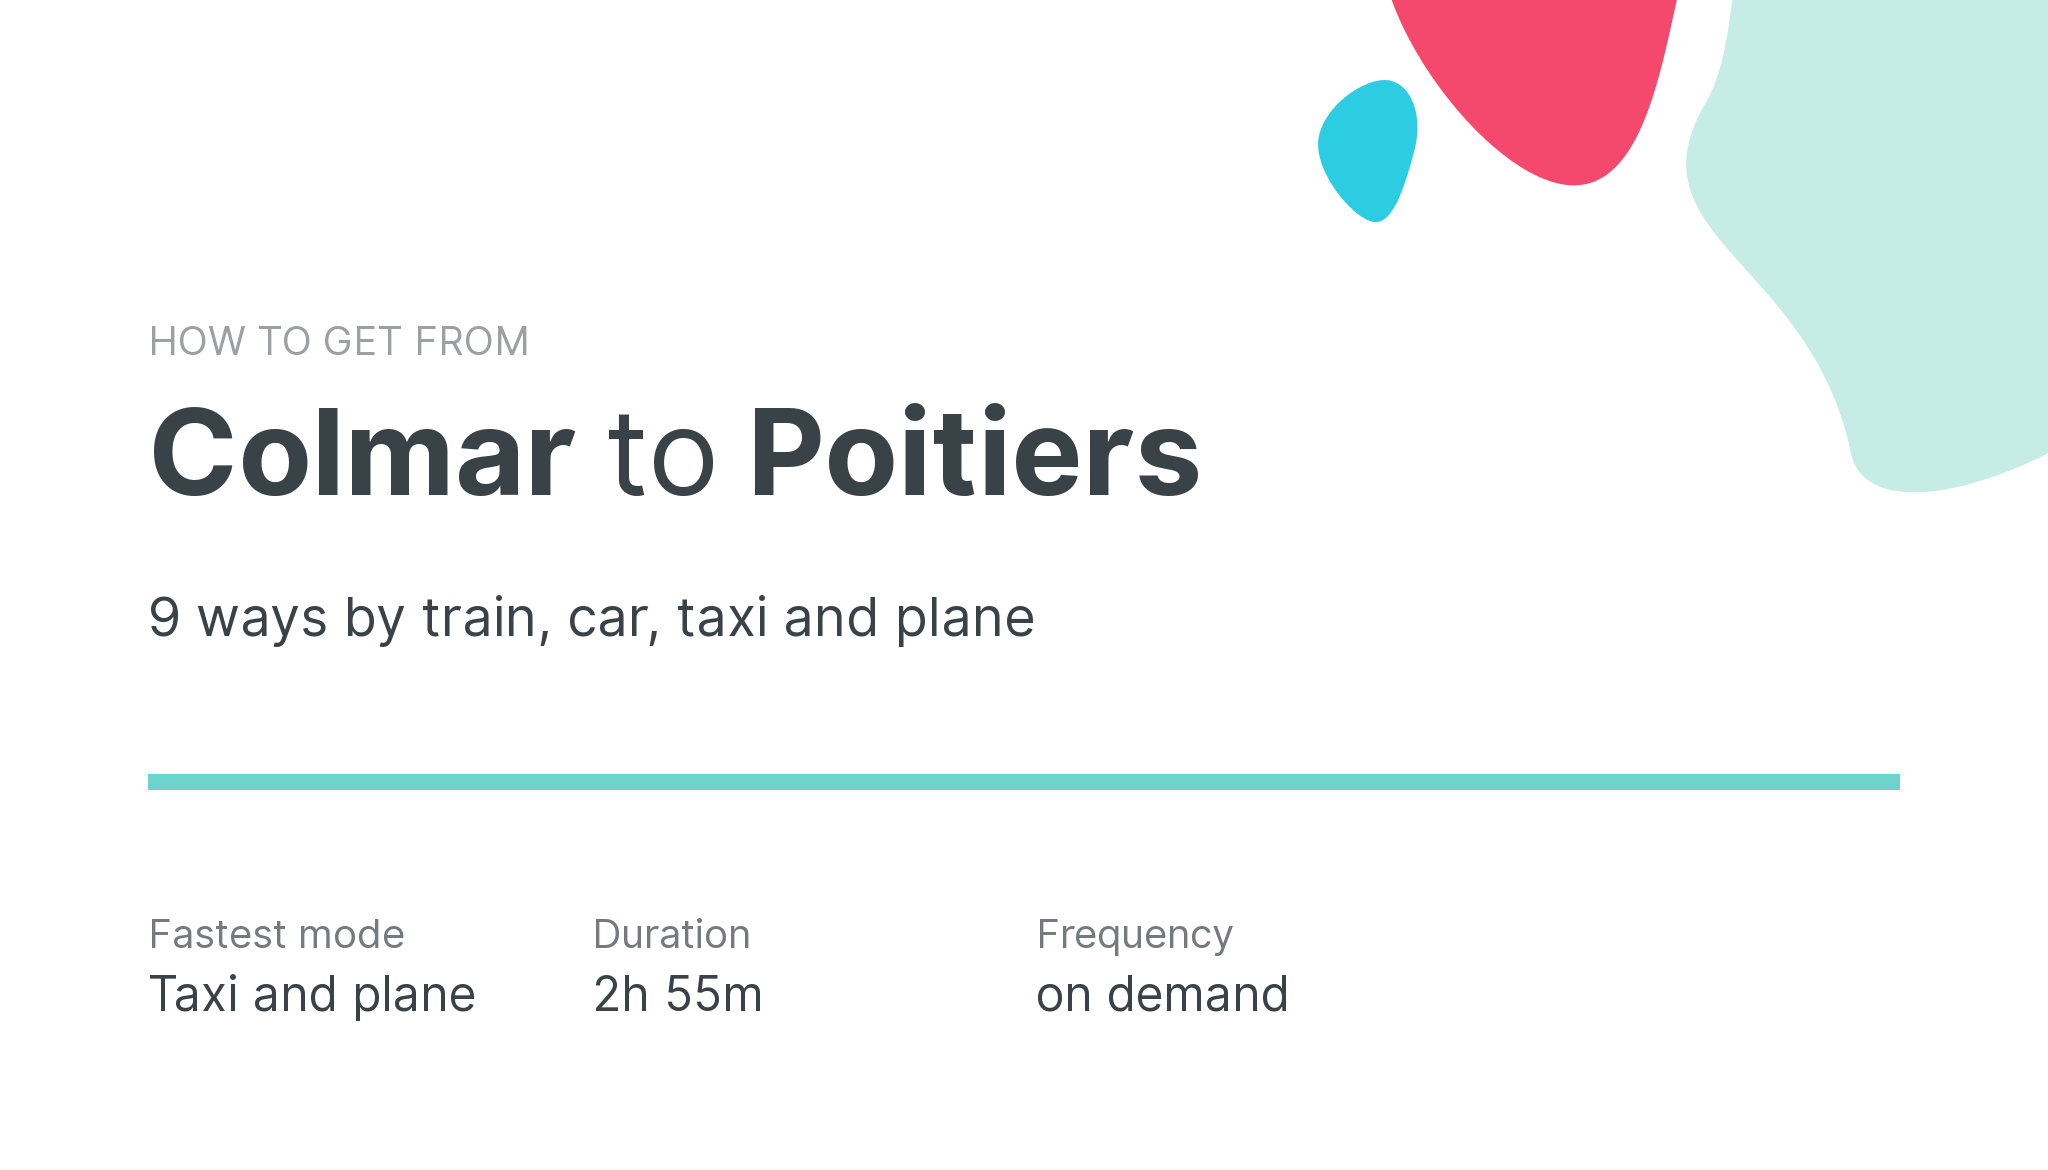 How do I get from Colmar to Poitiers